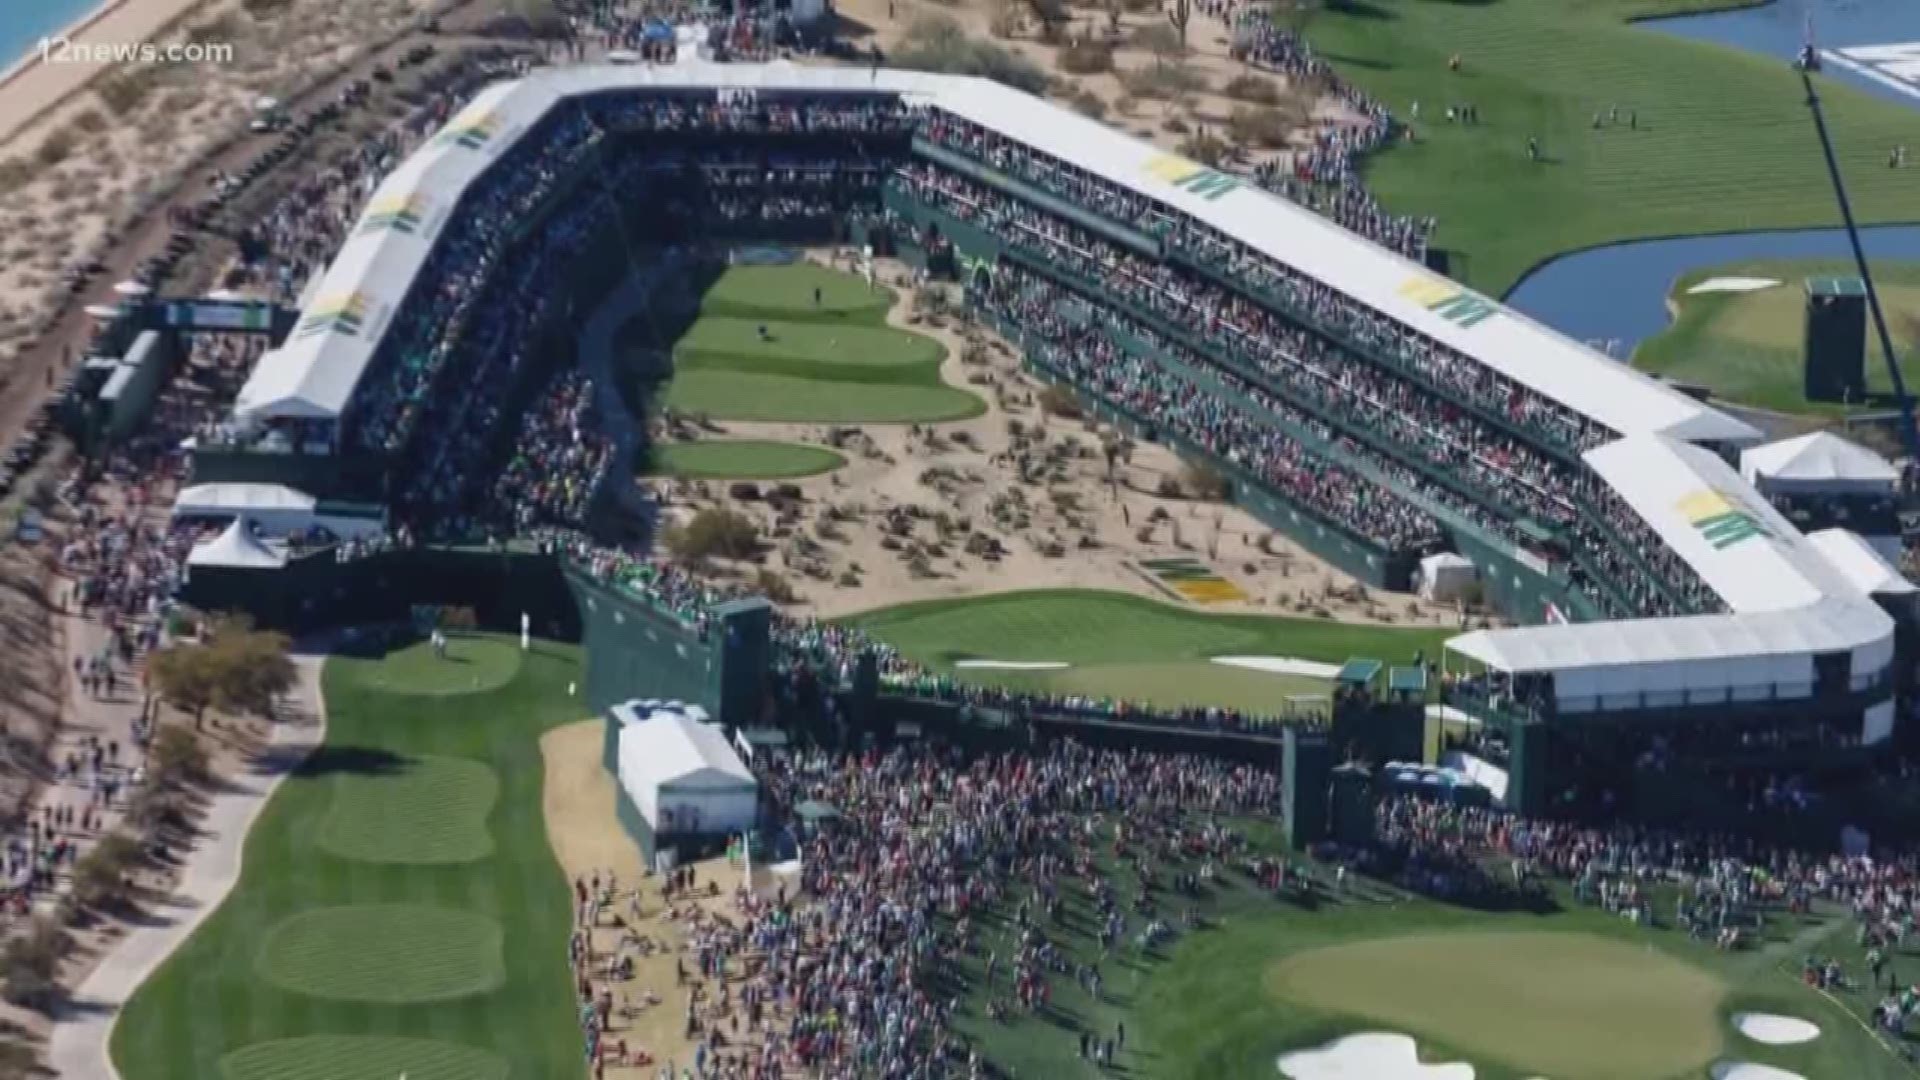 What to know before you go to the Waste Management Phoenix Open